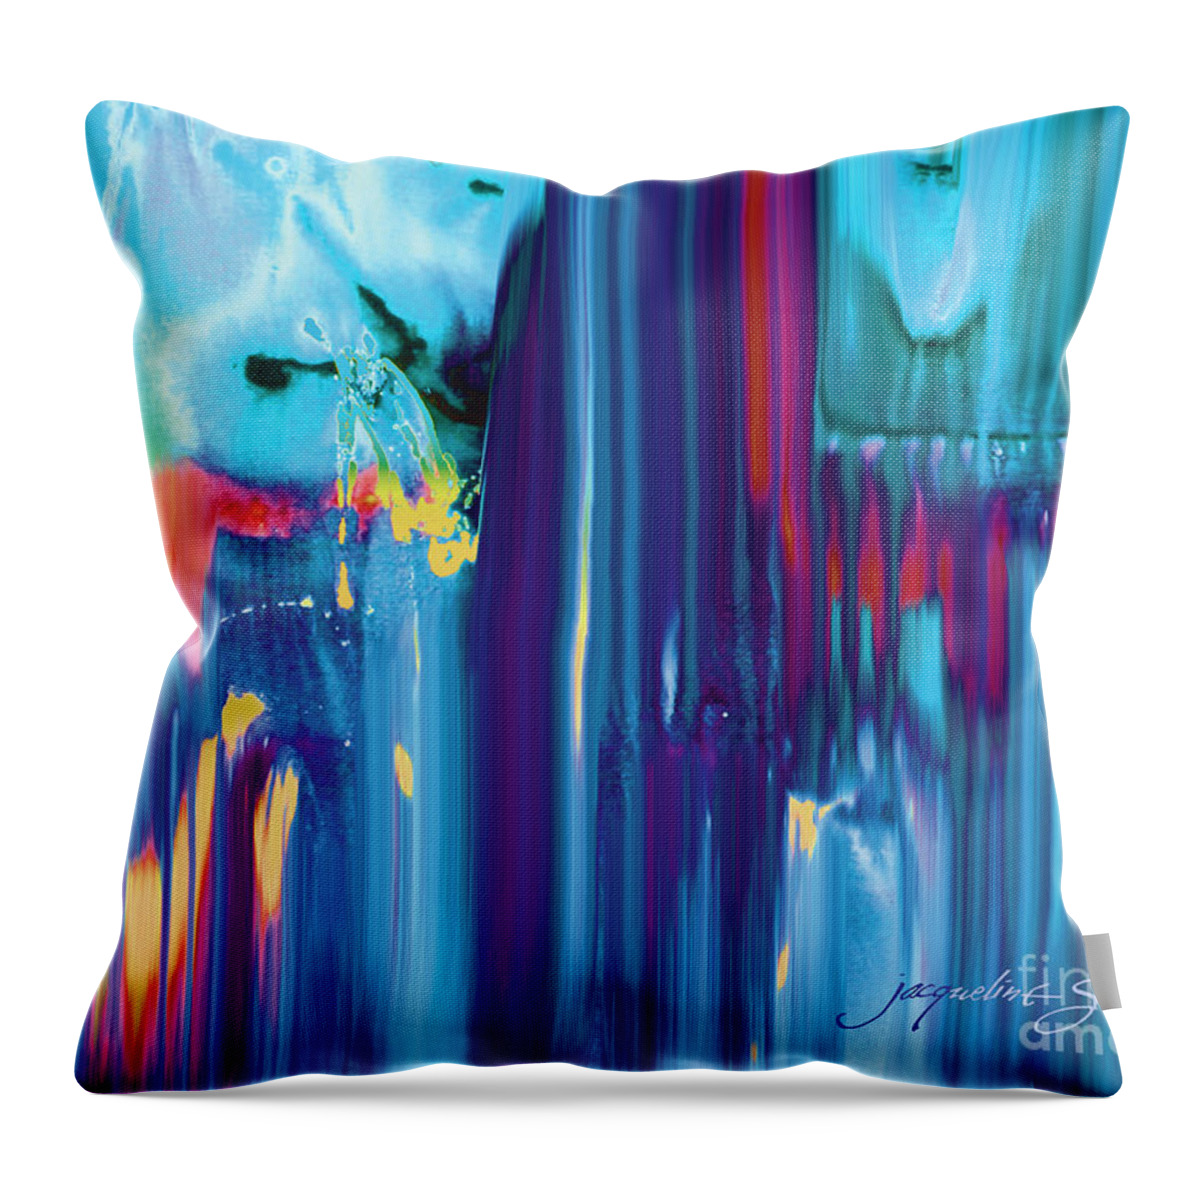 Abstract Throw Pillow featuring the digital art Drenched #1 by Jacqueline Shuler